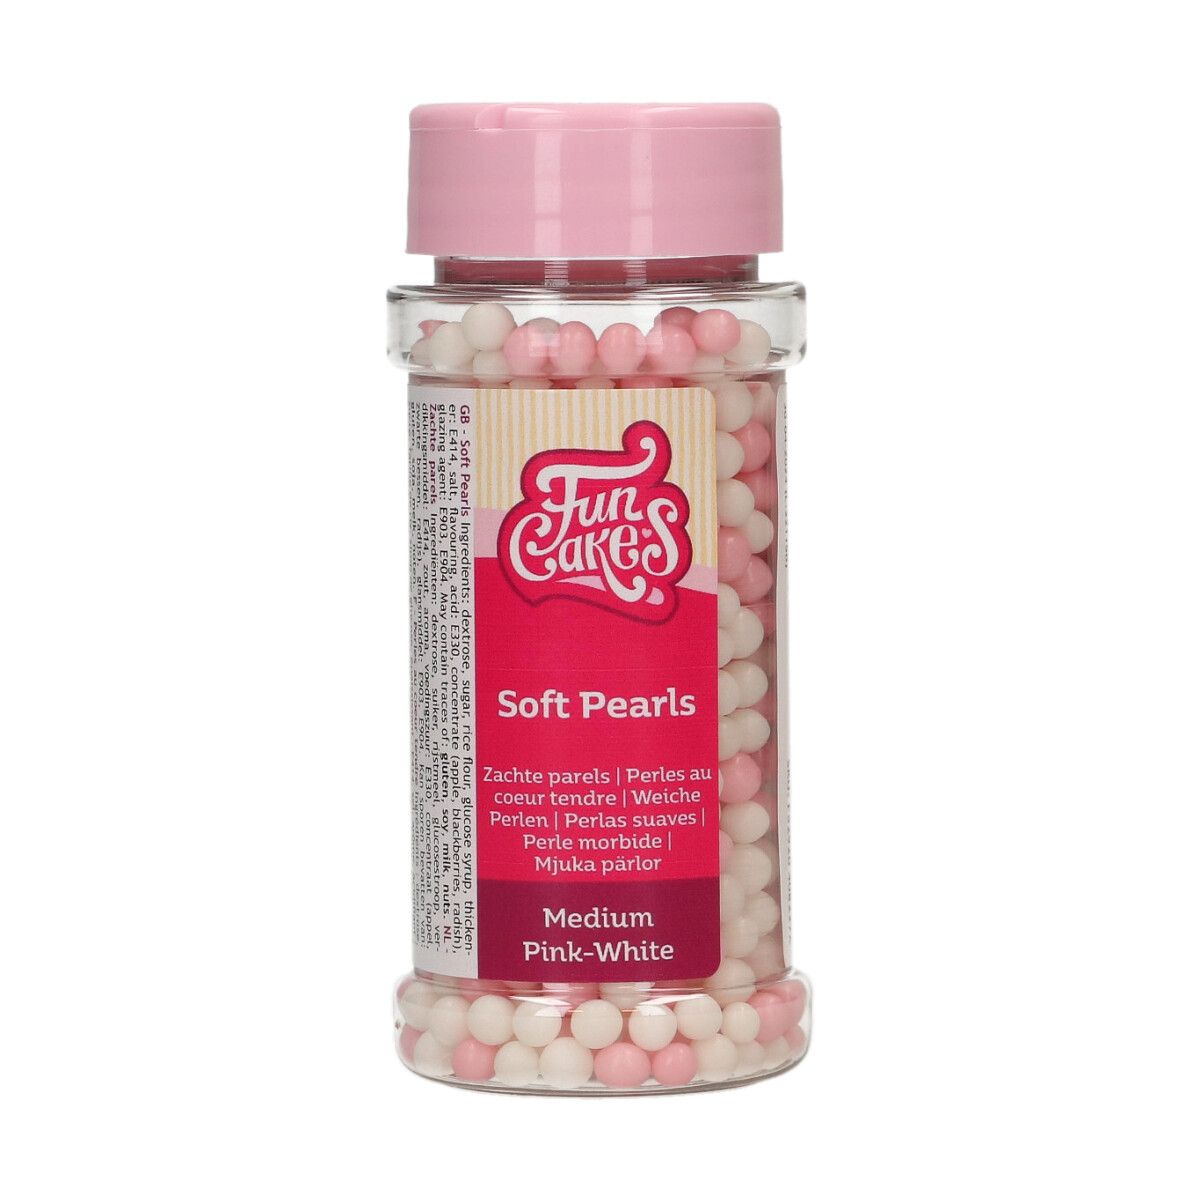 Soft Pearls - Pink/White